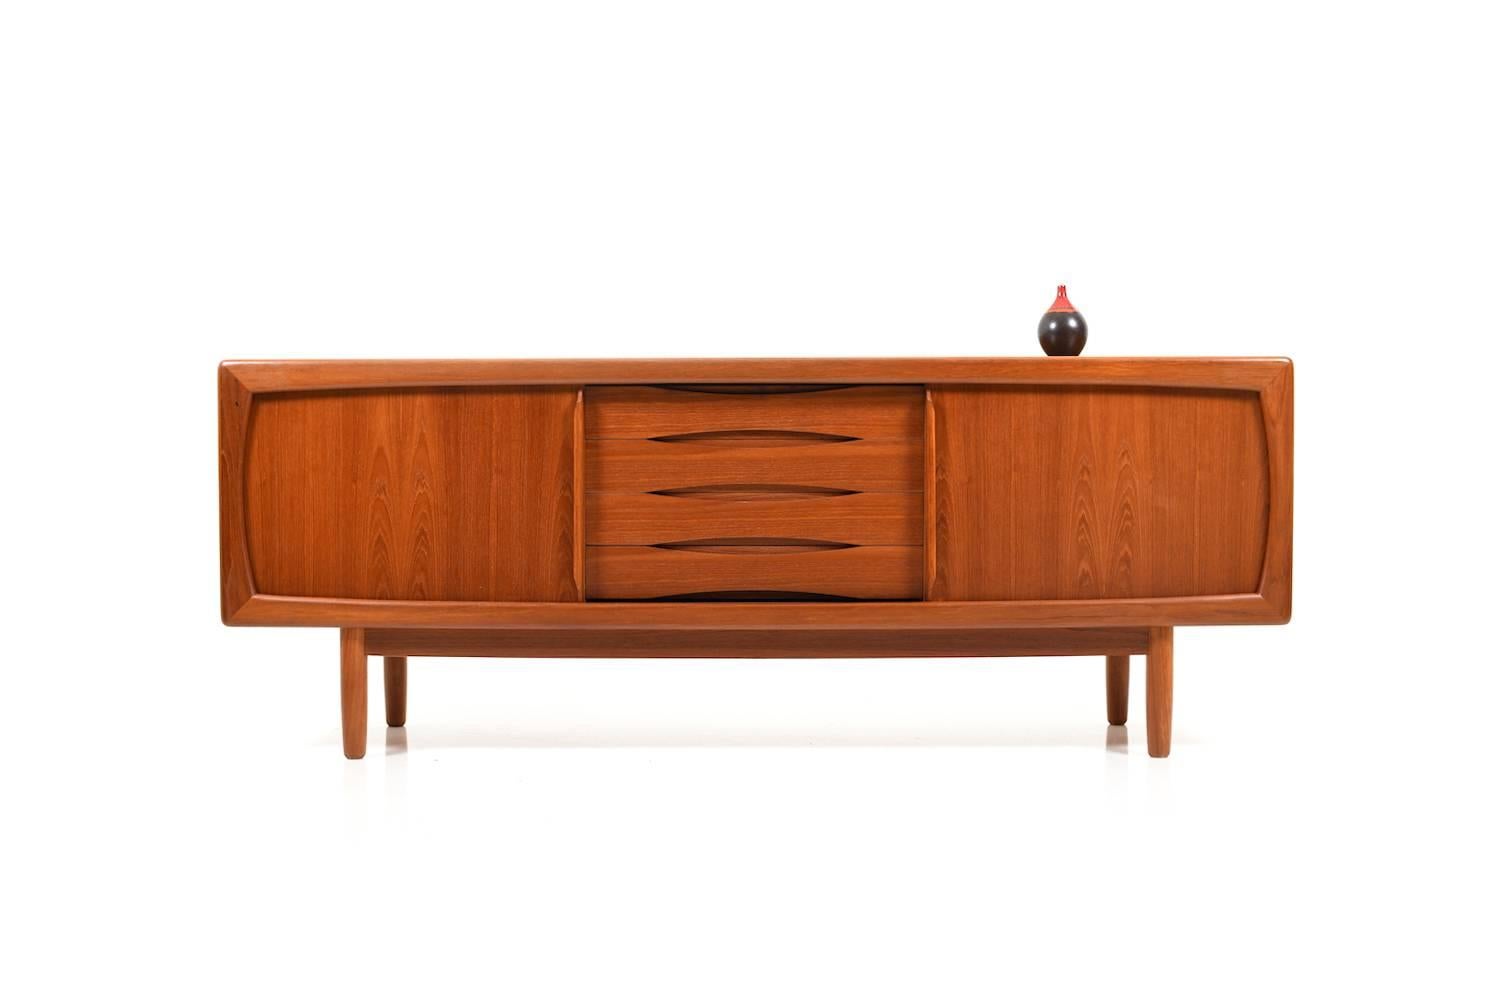 Midcentury Danish teak wooden sideboard / credenza by H. P. Hansen. Front with two sliding doors and four drawers. Behind the doors with one shelf on each site. Very nice vintage condition and color of teak.